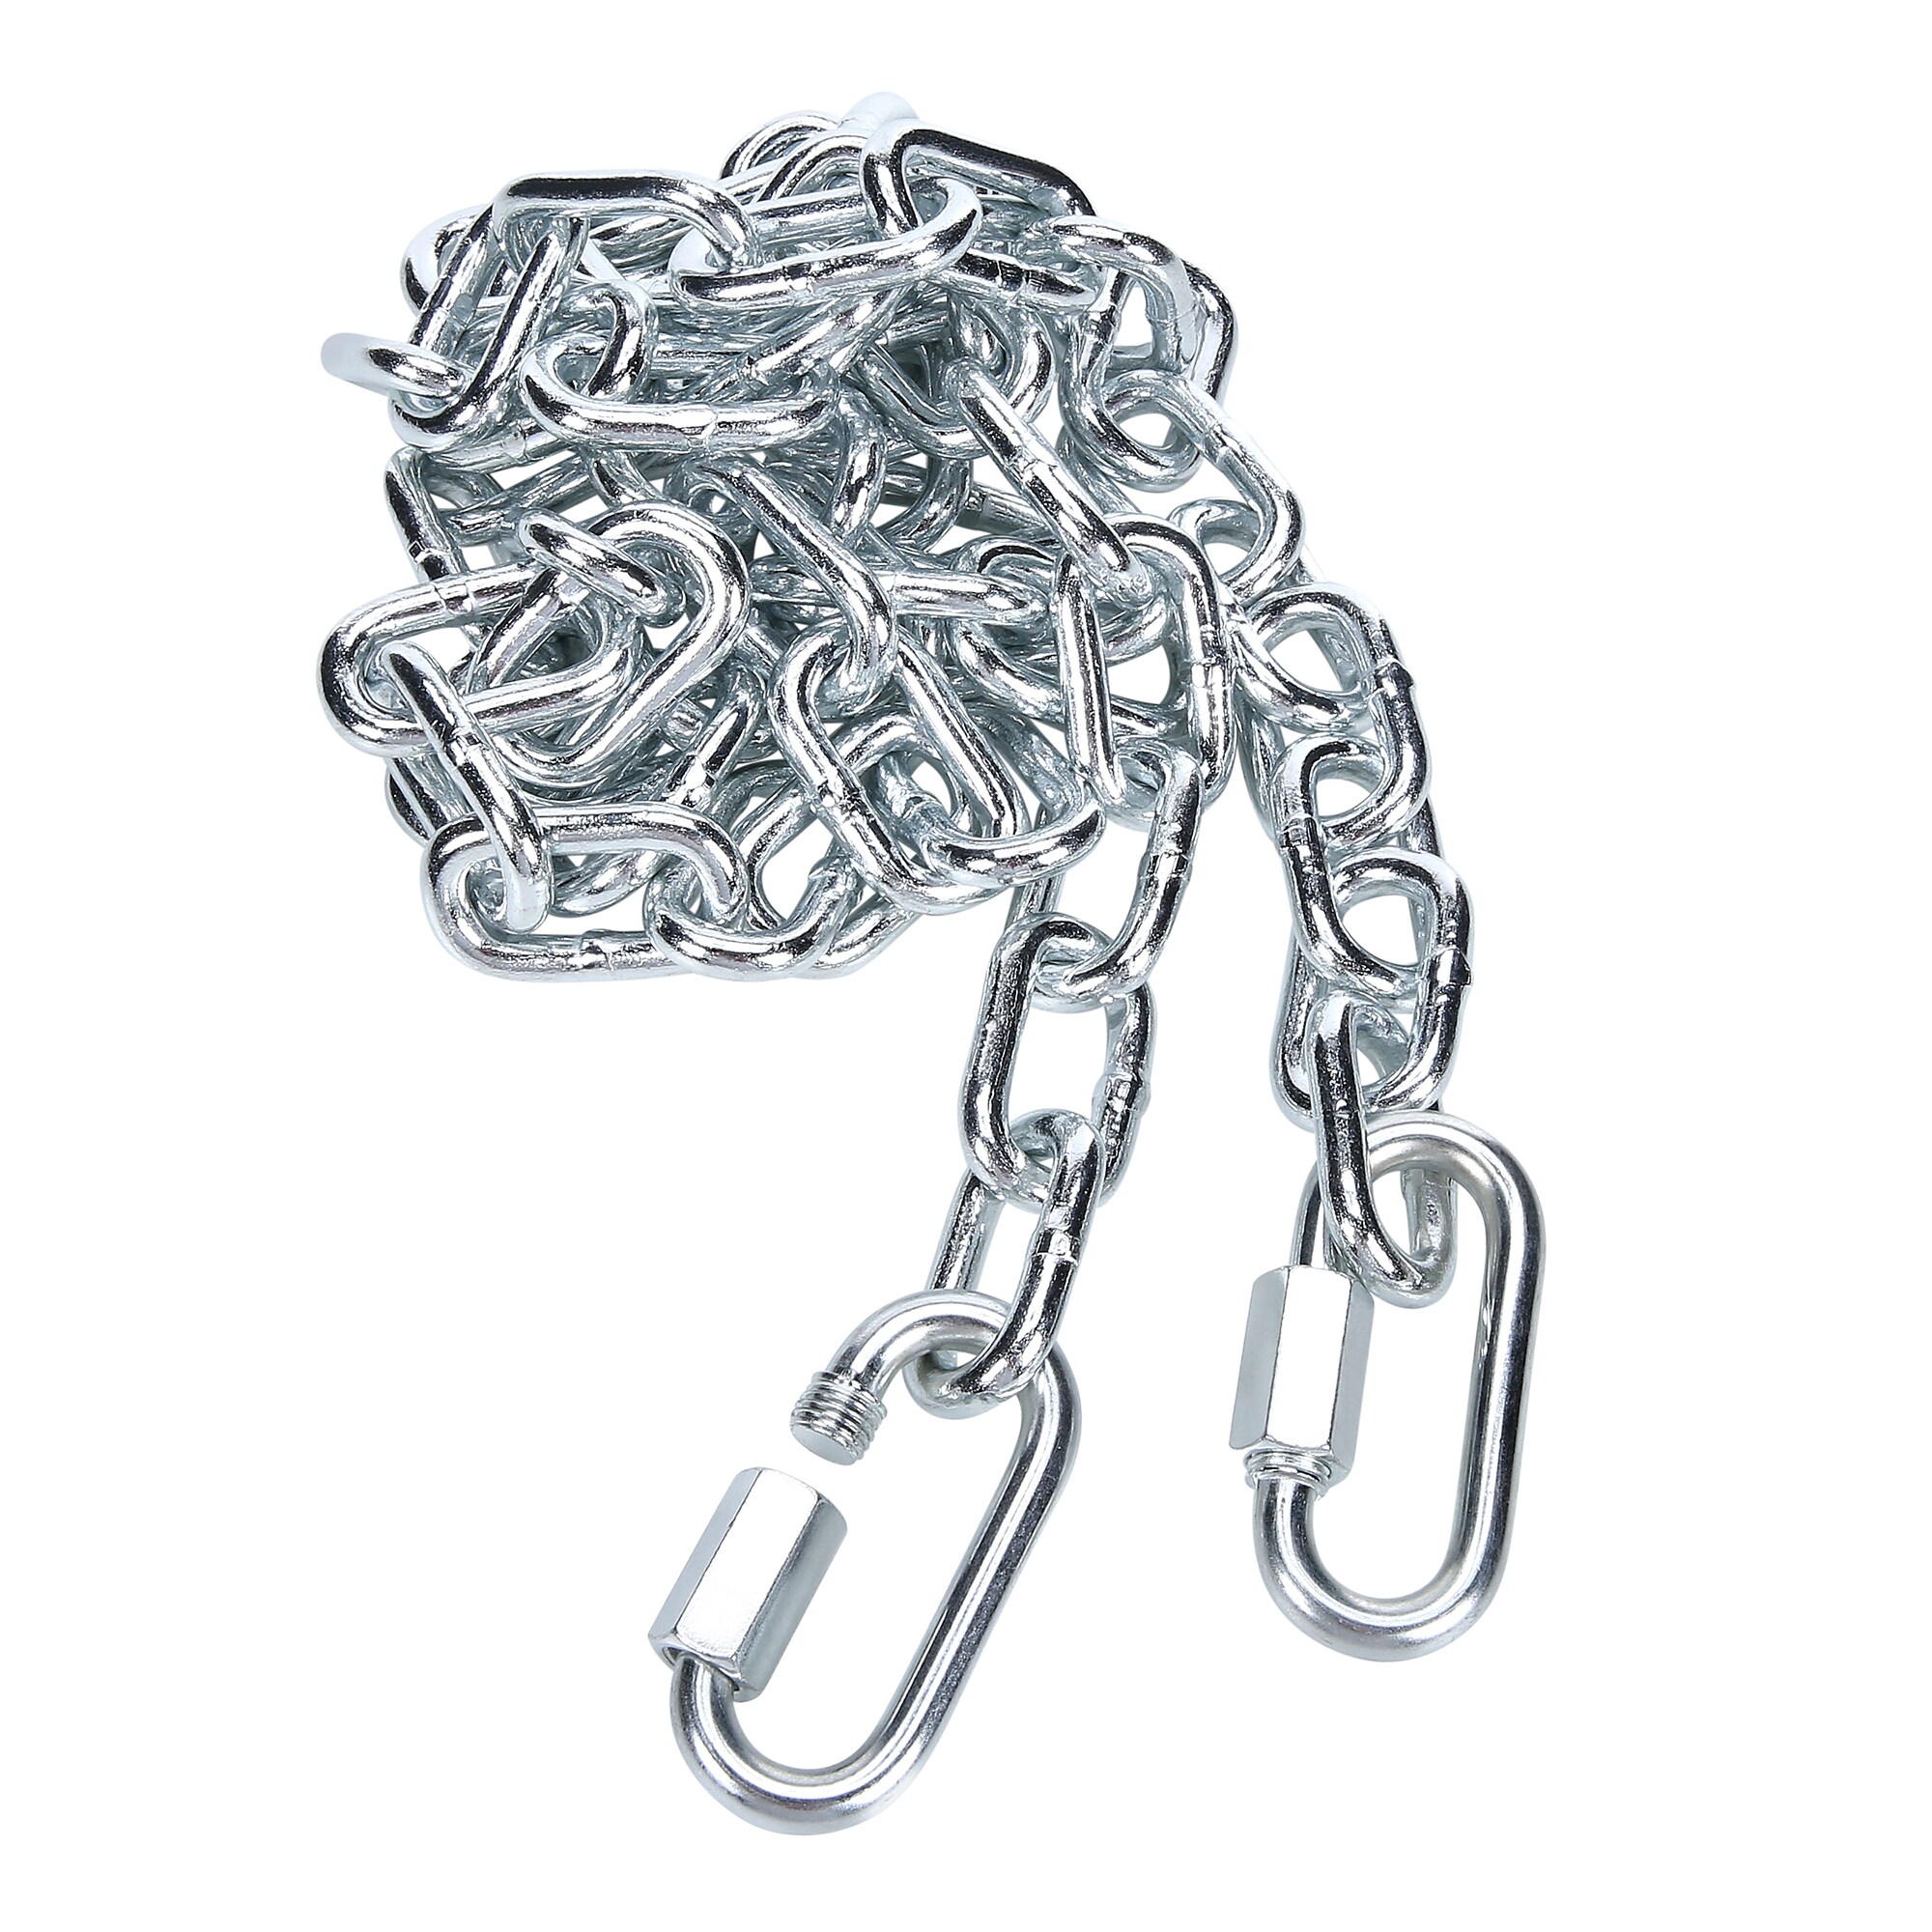 Reese 5,000-lb Safety Chain